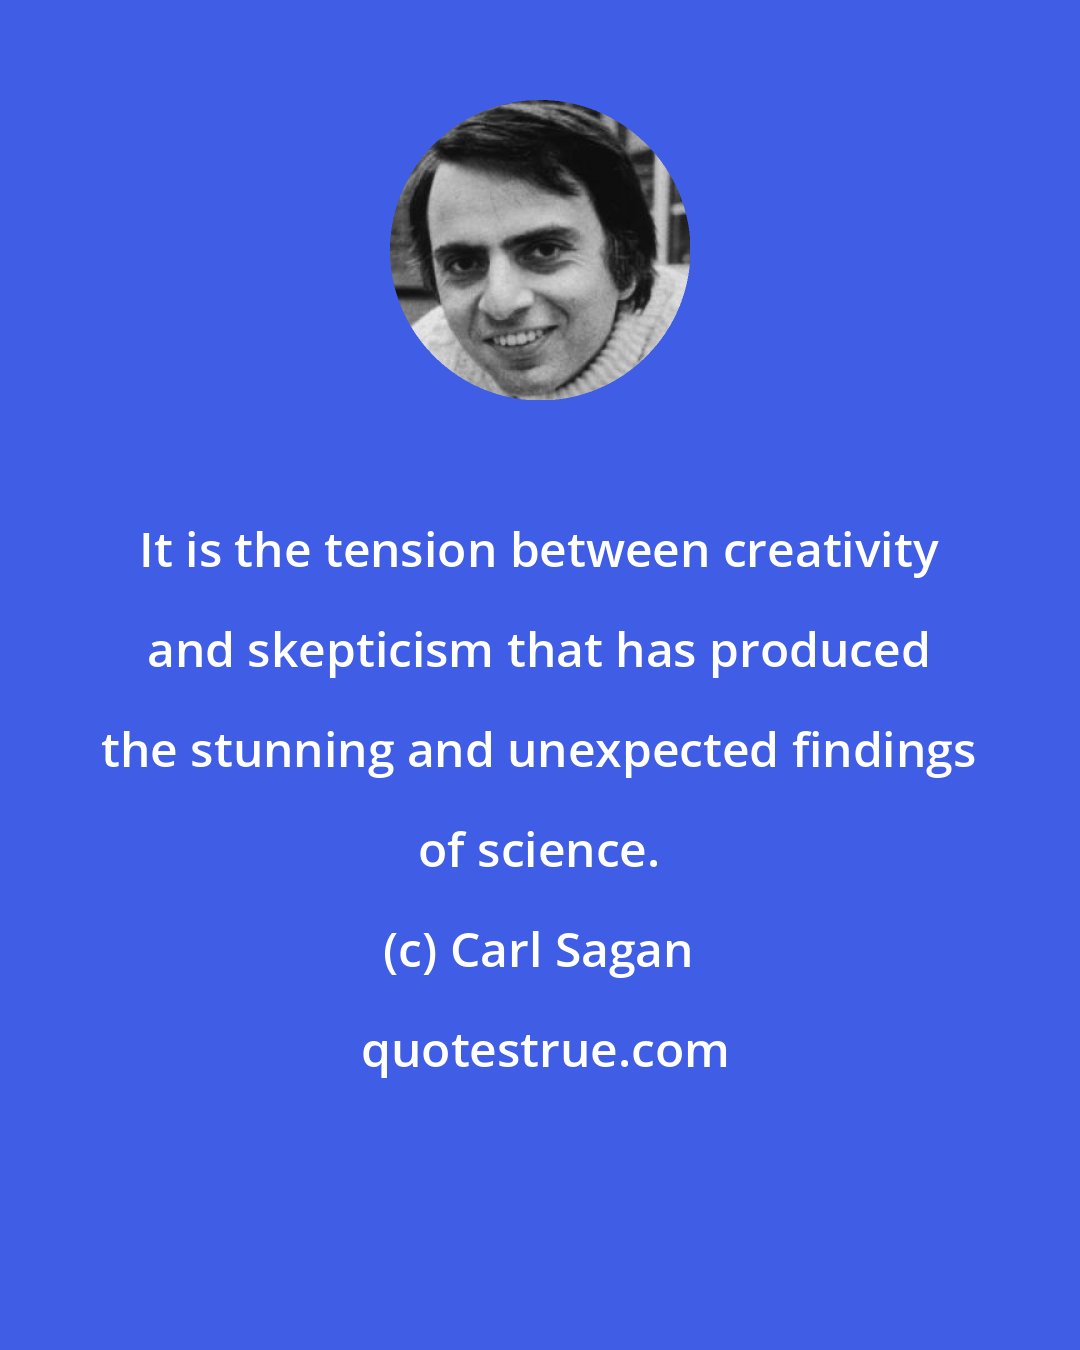 Carl Sagan: It is the tension between creativity and skepticism that has produced the stunning and unexpected findings of science.